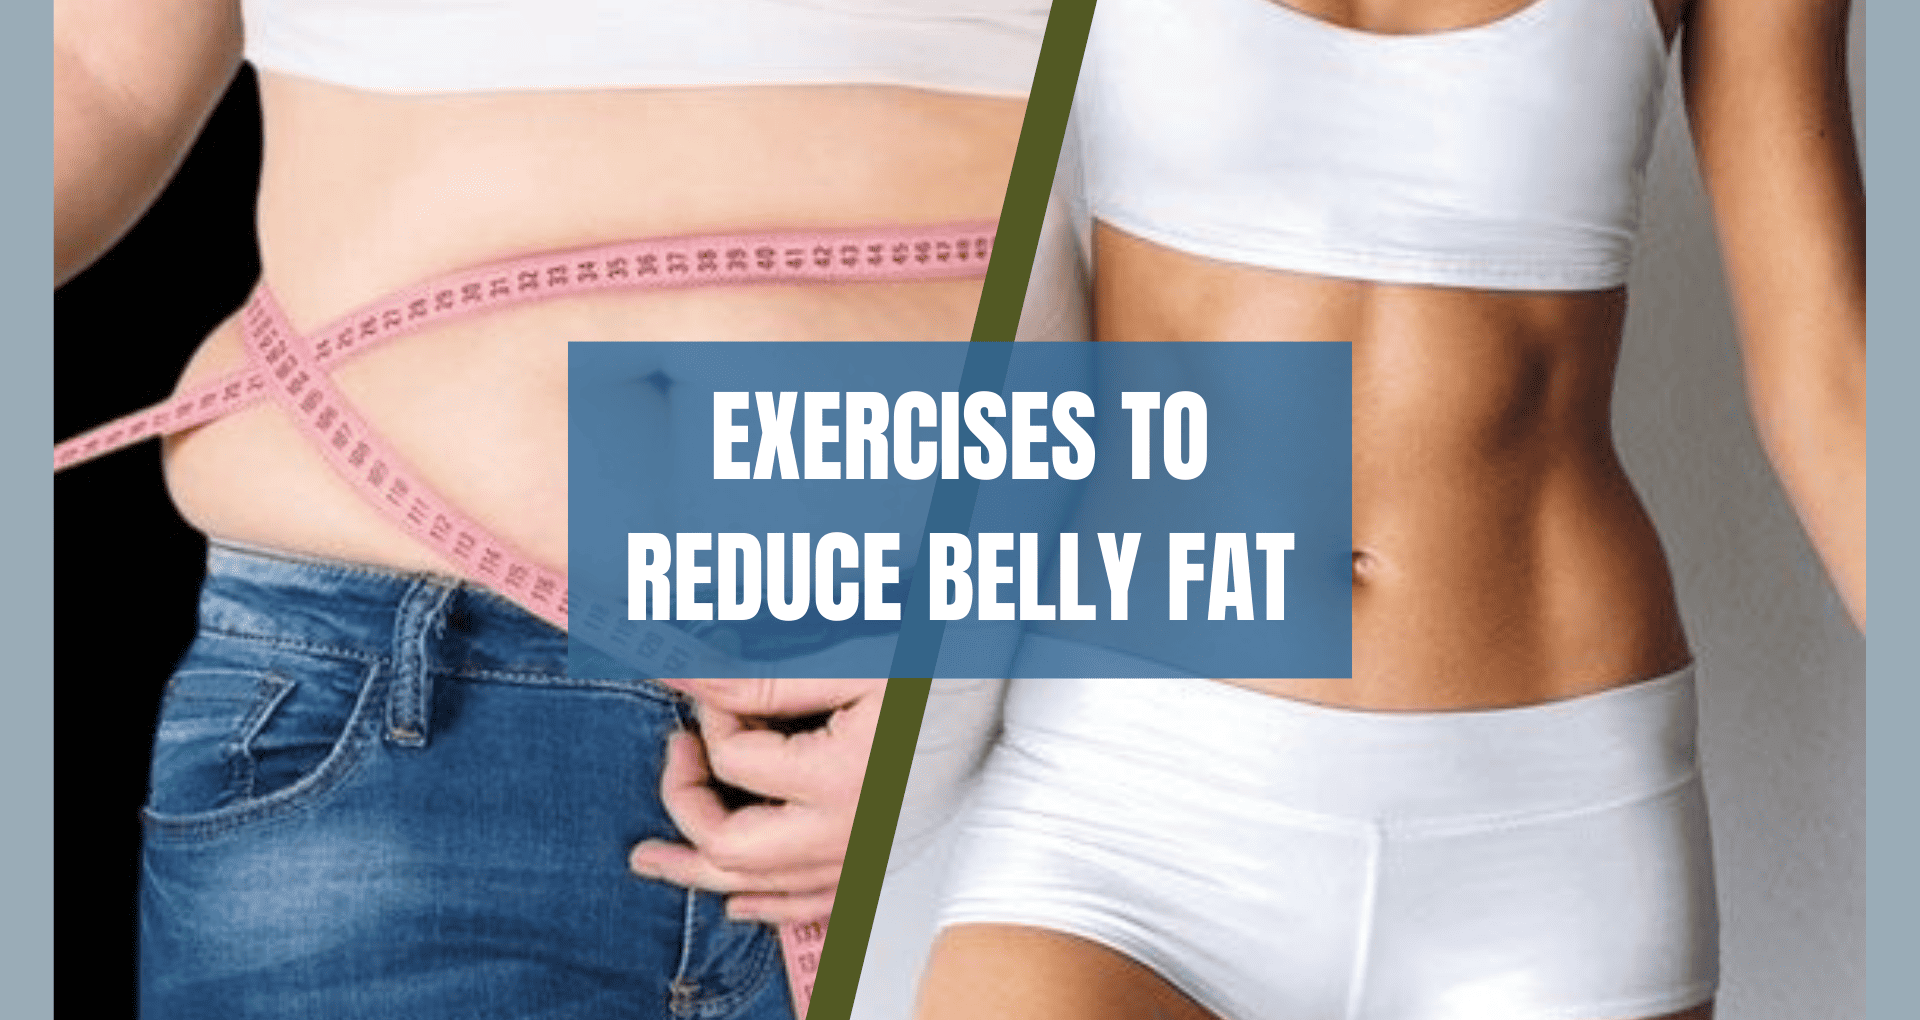 Healthy Living & Fit on X: Lower belly fat pooch. Do you want to